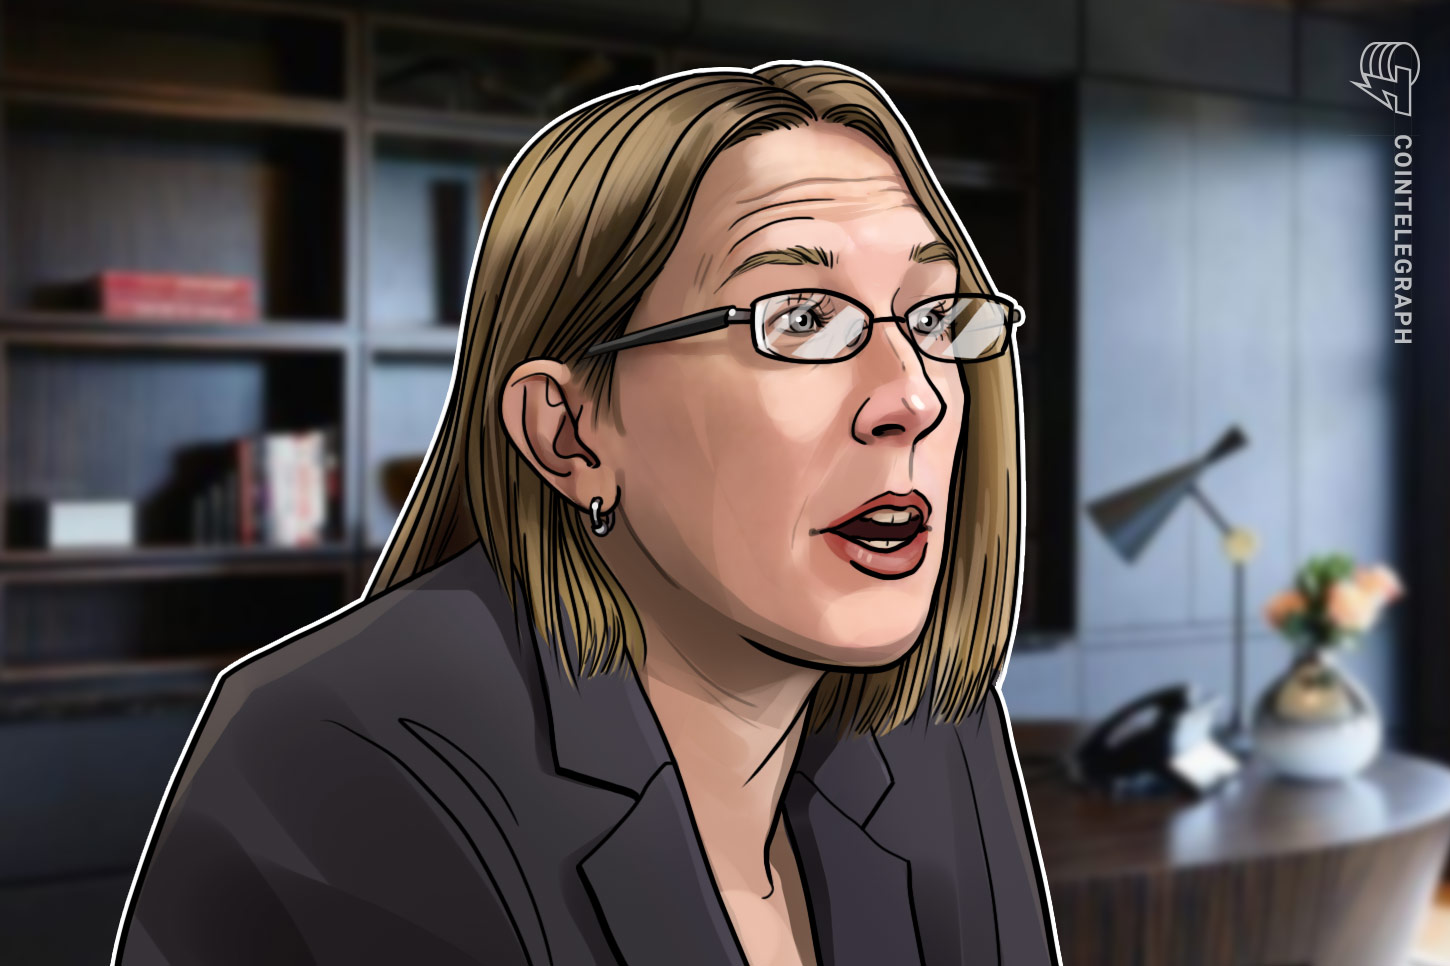 SEC’s Cryptomom Peirce Believes US Capital Markets Can ‘Remodel Folks’s Lives’